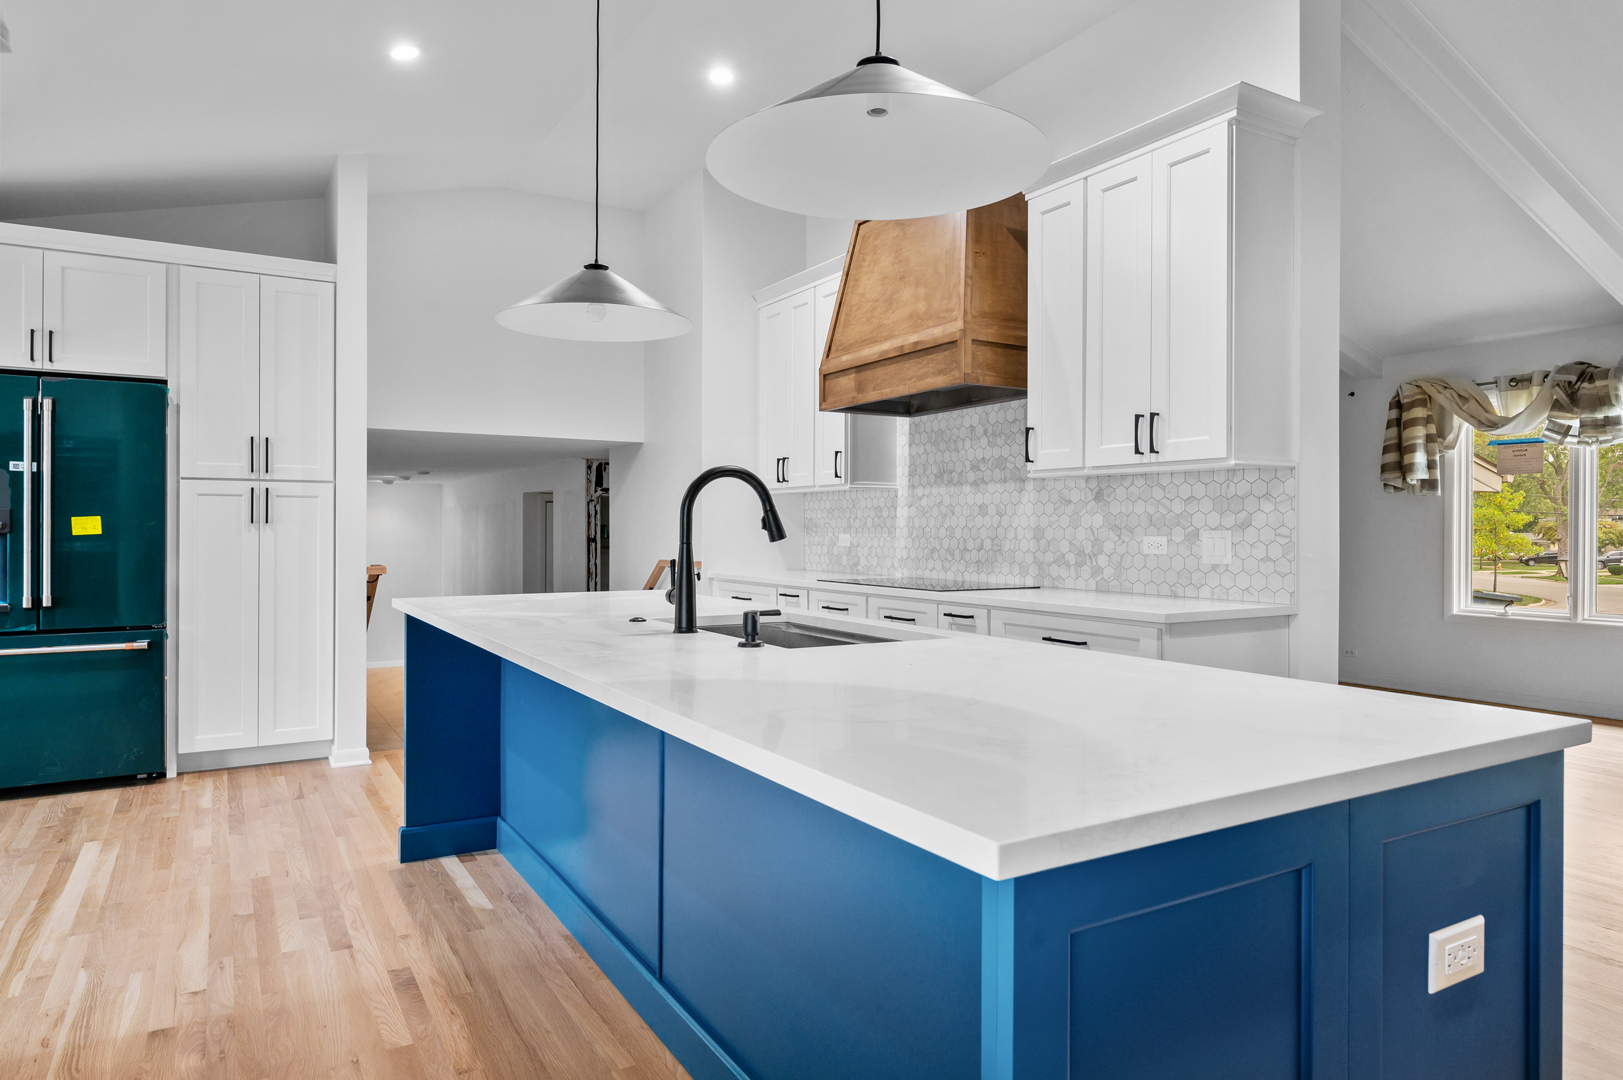 Kitchen remodeling design tips for your Chicago home.